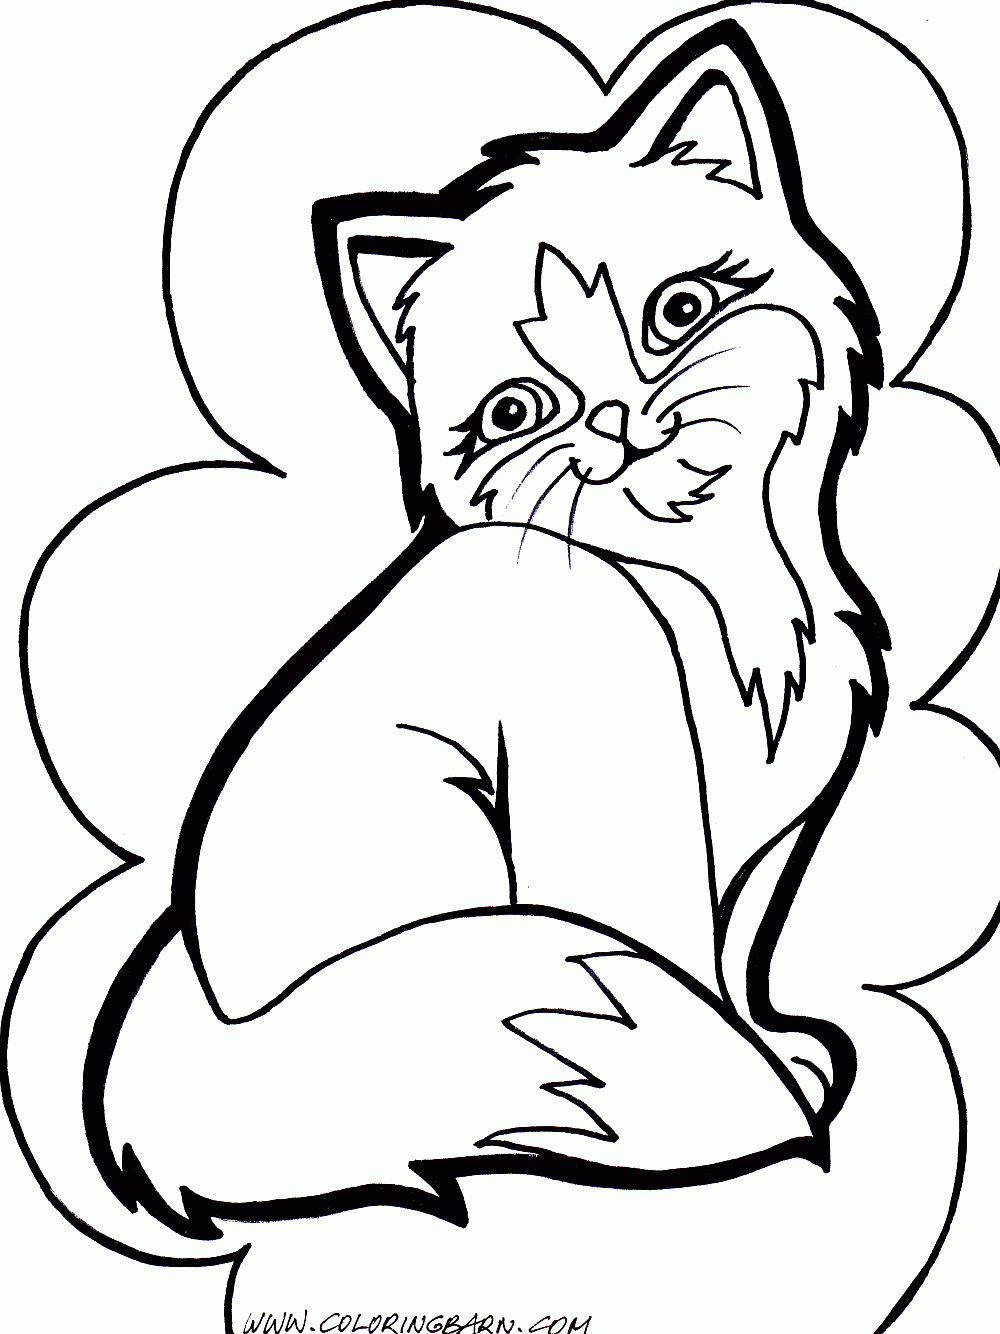 Puppy Kitten Coloring Pages - High Quality Coloring Pages